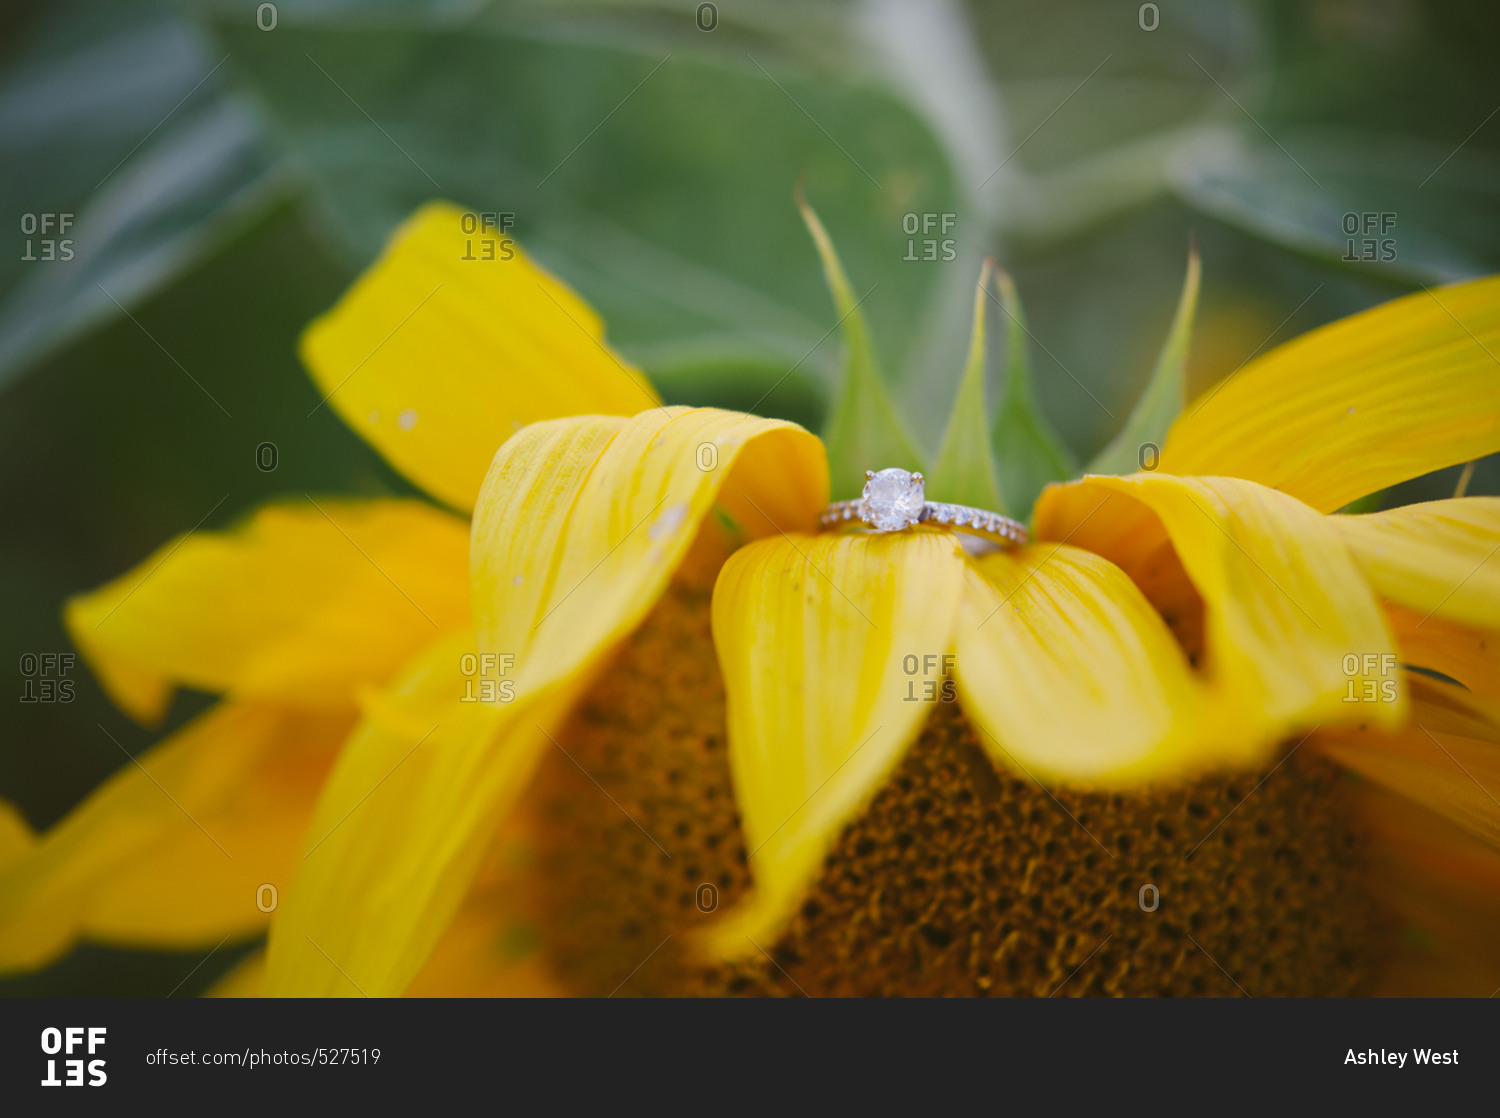 Engagement ring on a sunflower